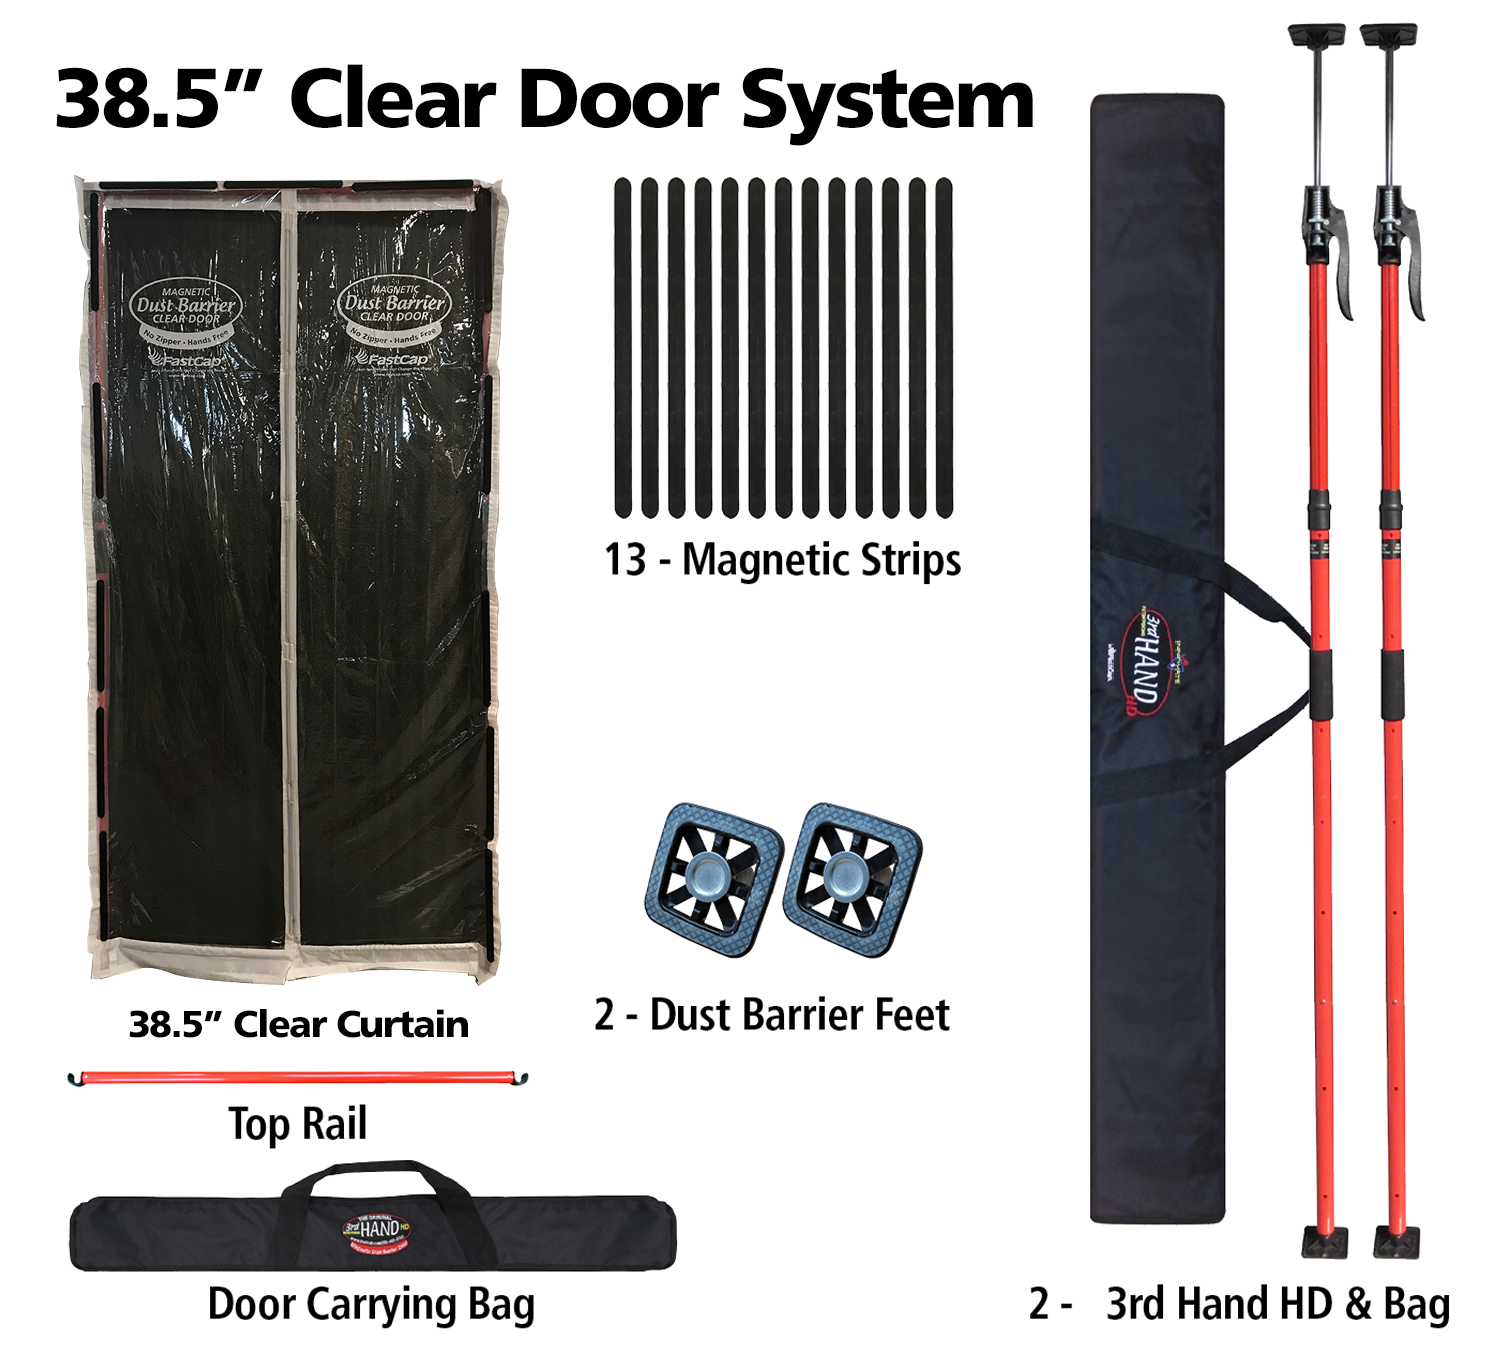 Clear Magnetic Dust Door, Top Rail, Door Carrying Bag, 2x Dust Barrier Feet, 13x Magnetic Strips, 2x 3rd Hand HD with bag